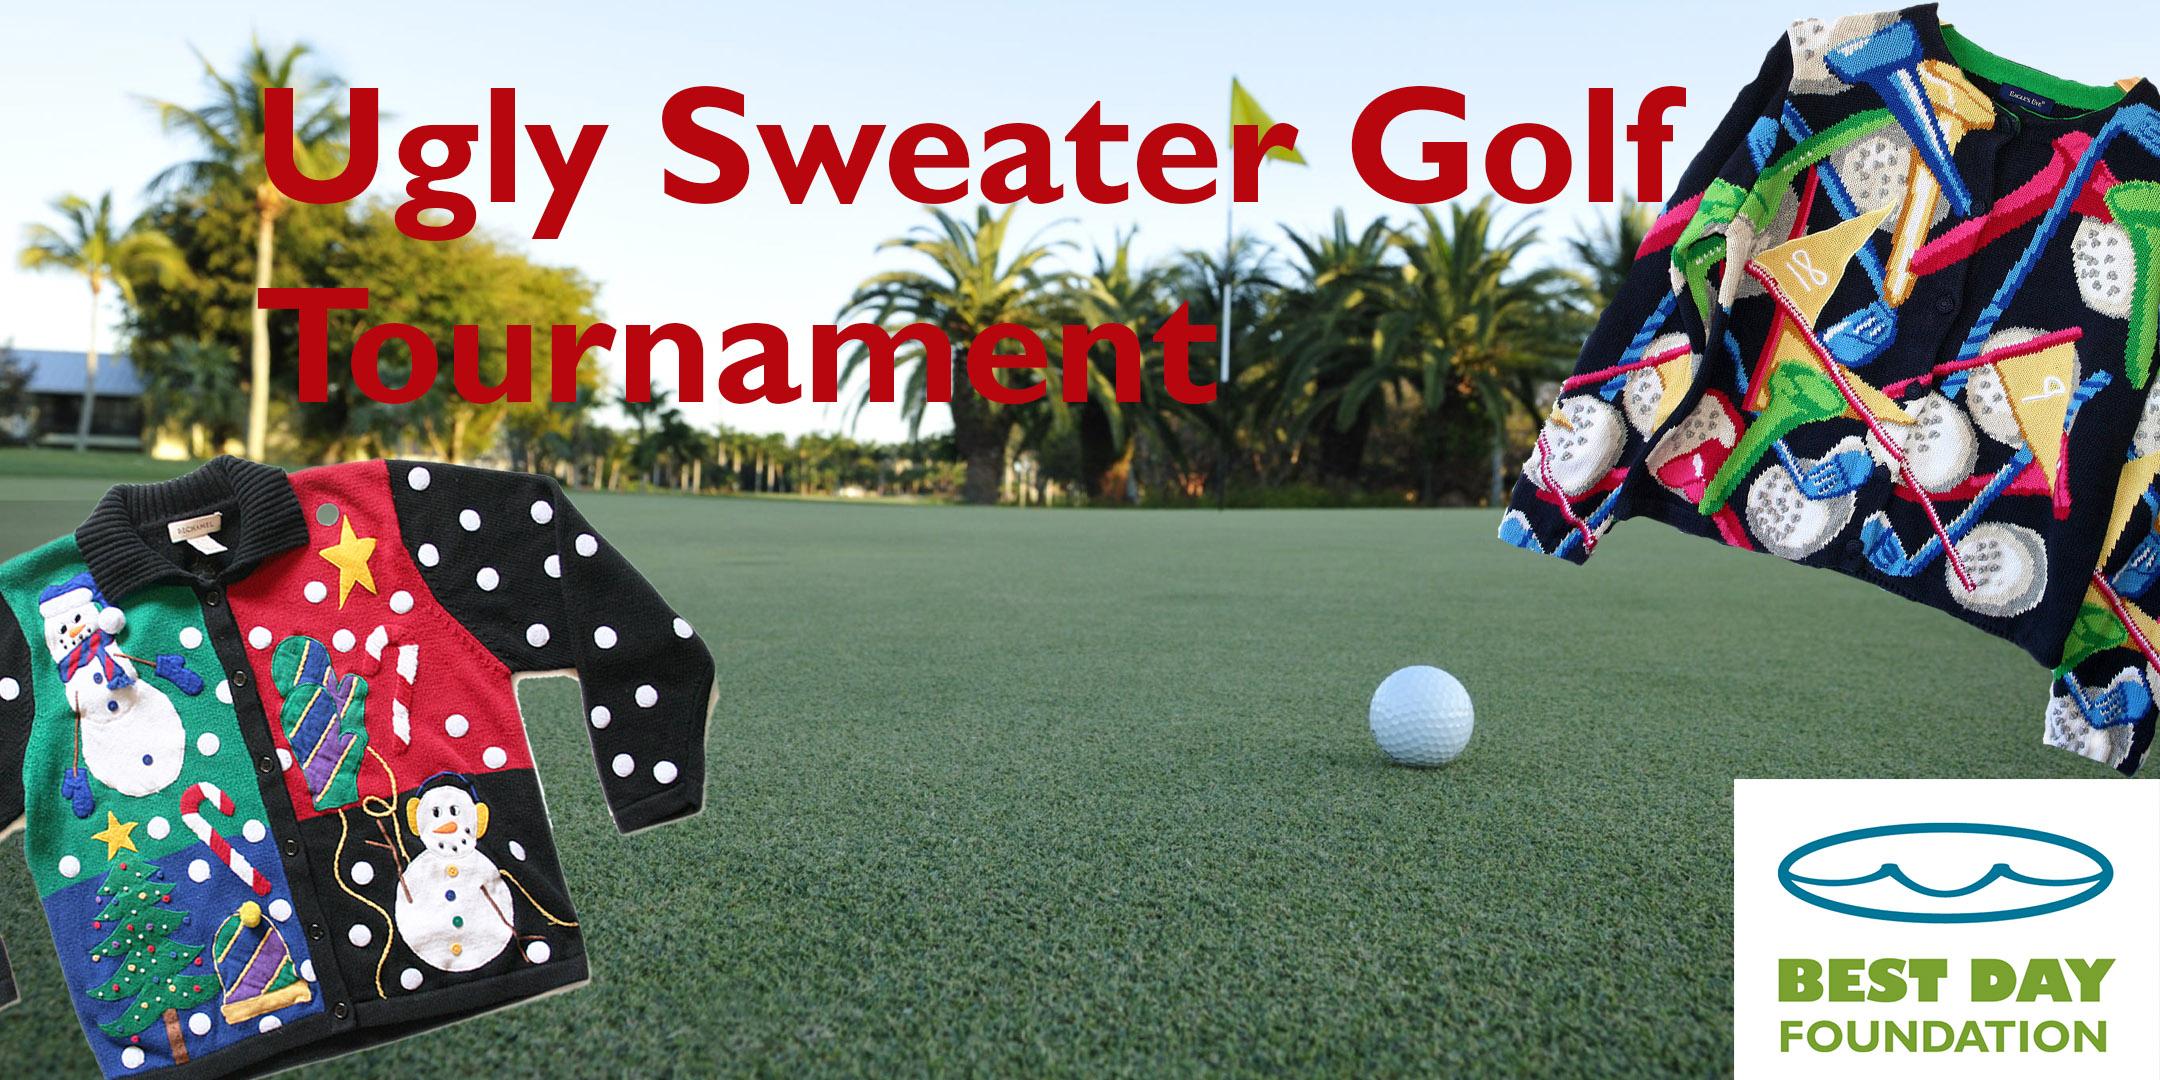 UGLY SWEATER GOLF TOURNAMENT to benefit Best Day Foundation